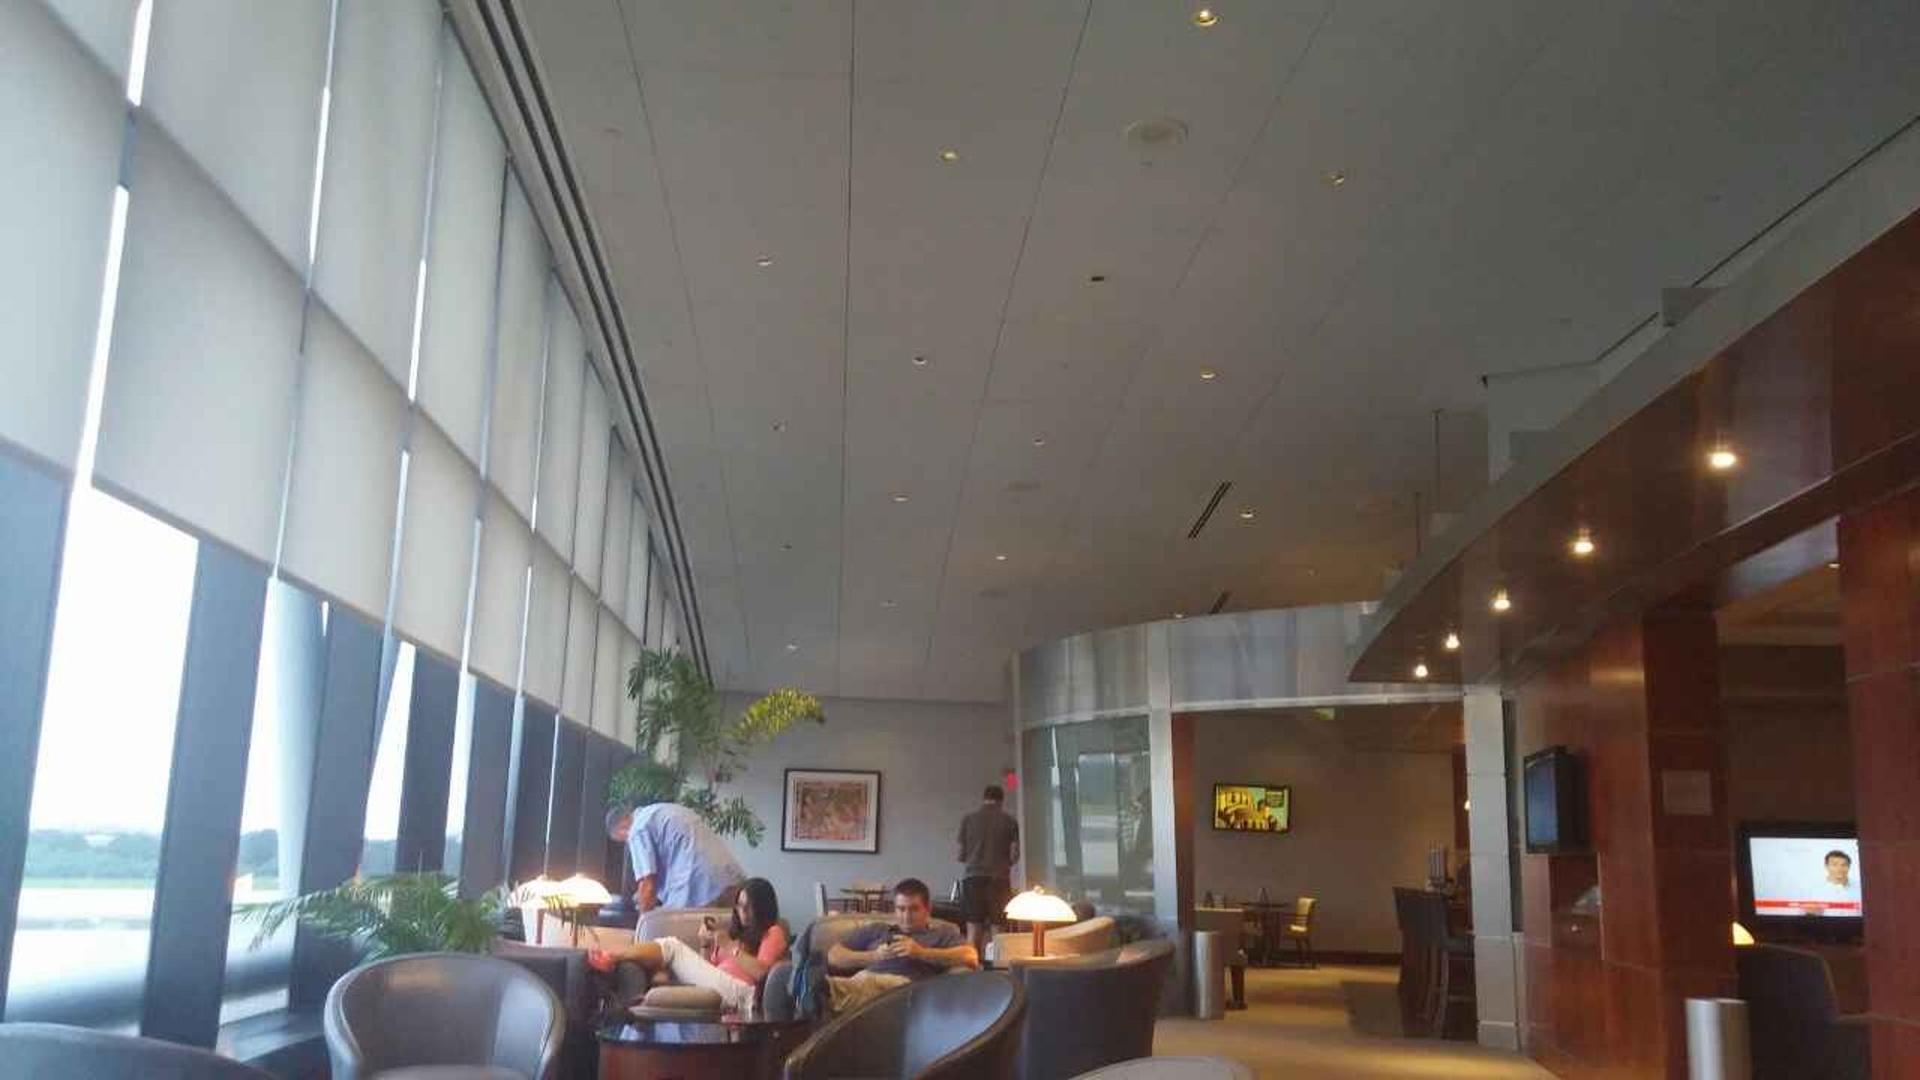 American Airlines Admirals Club image 12 of 20